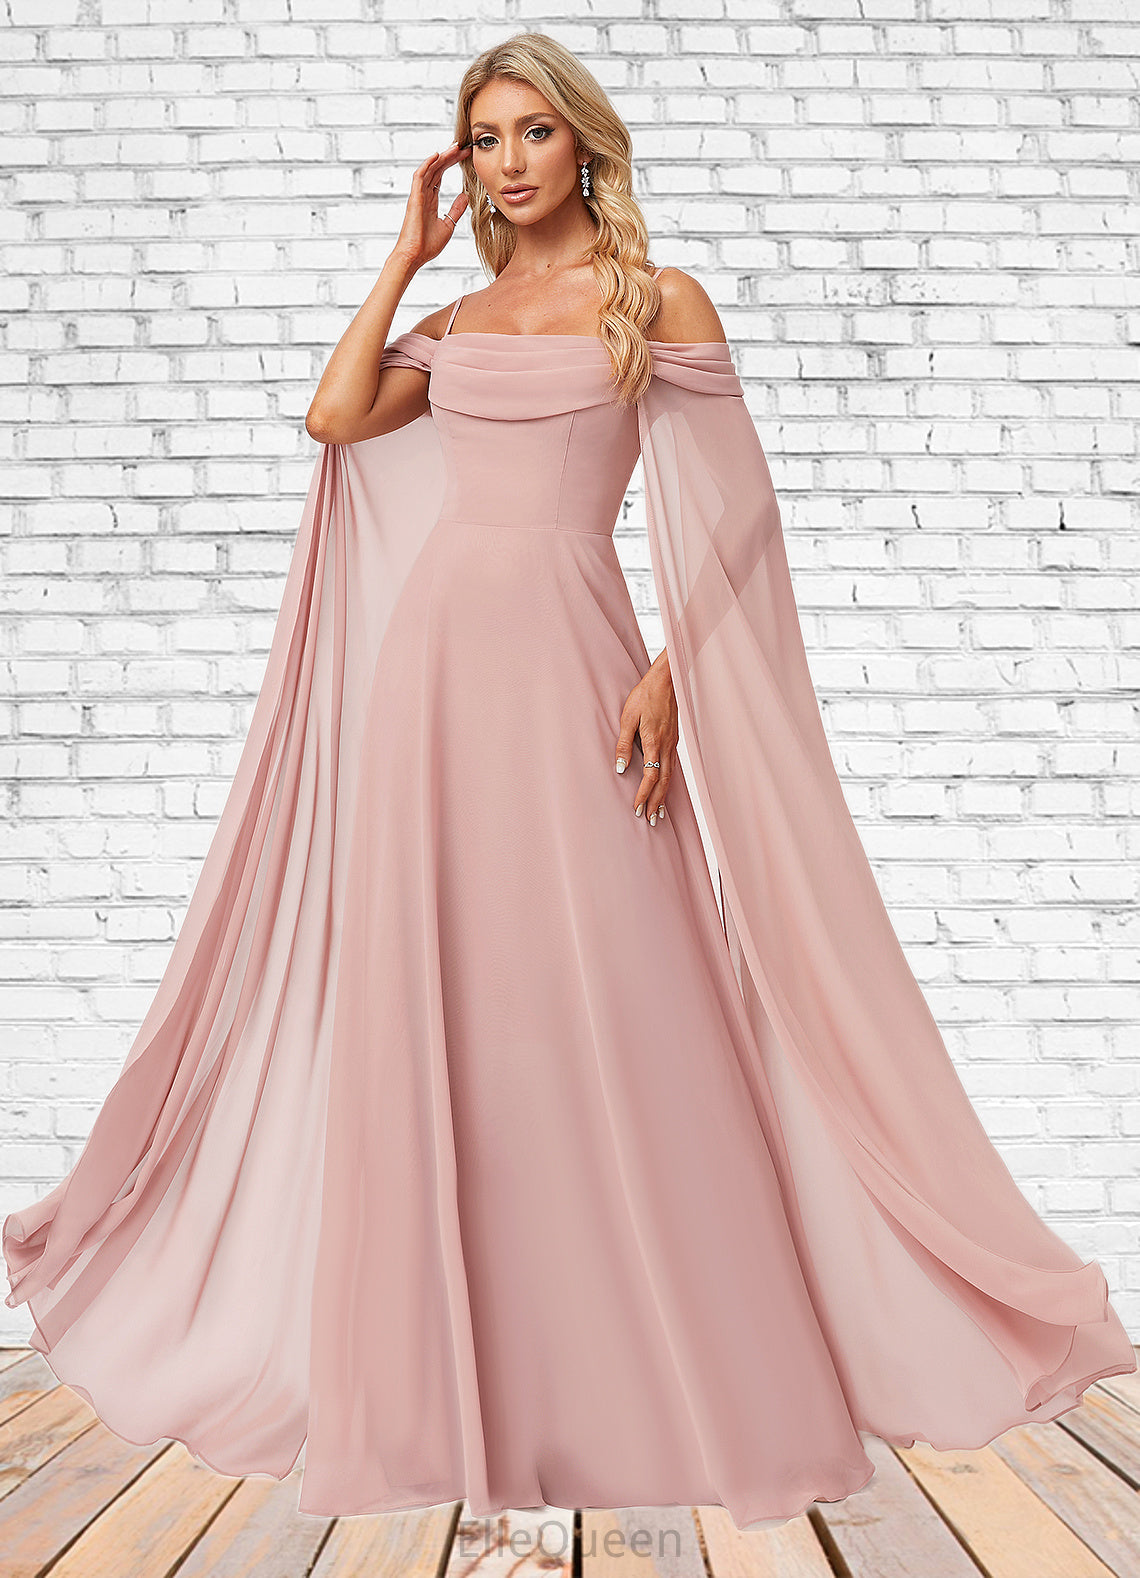 Pancy A-line Cold Shoulder Square Floor-Length Chiffon Bridesmaid Dress With Ruffle DGP0022598